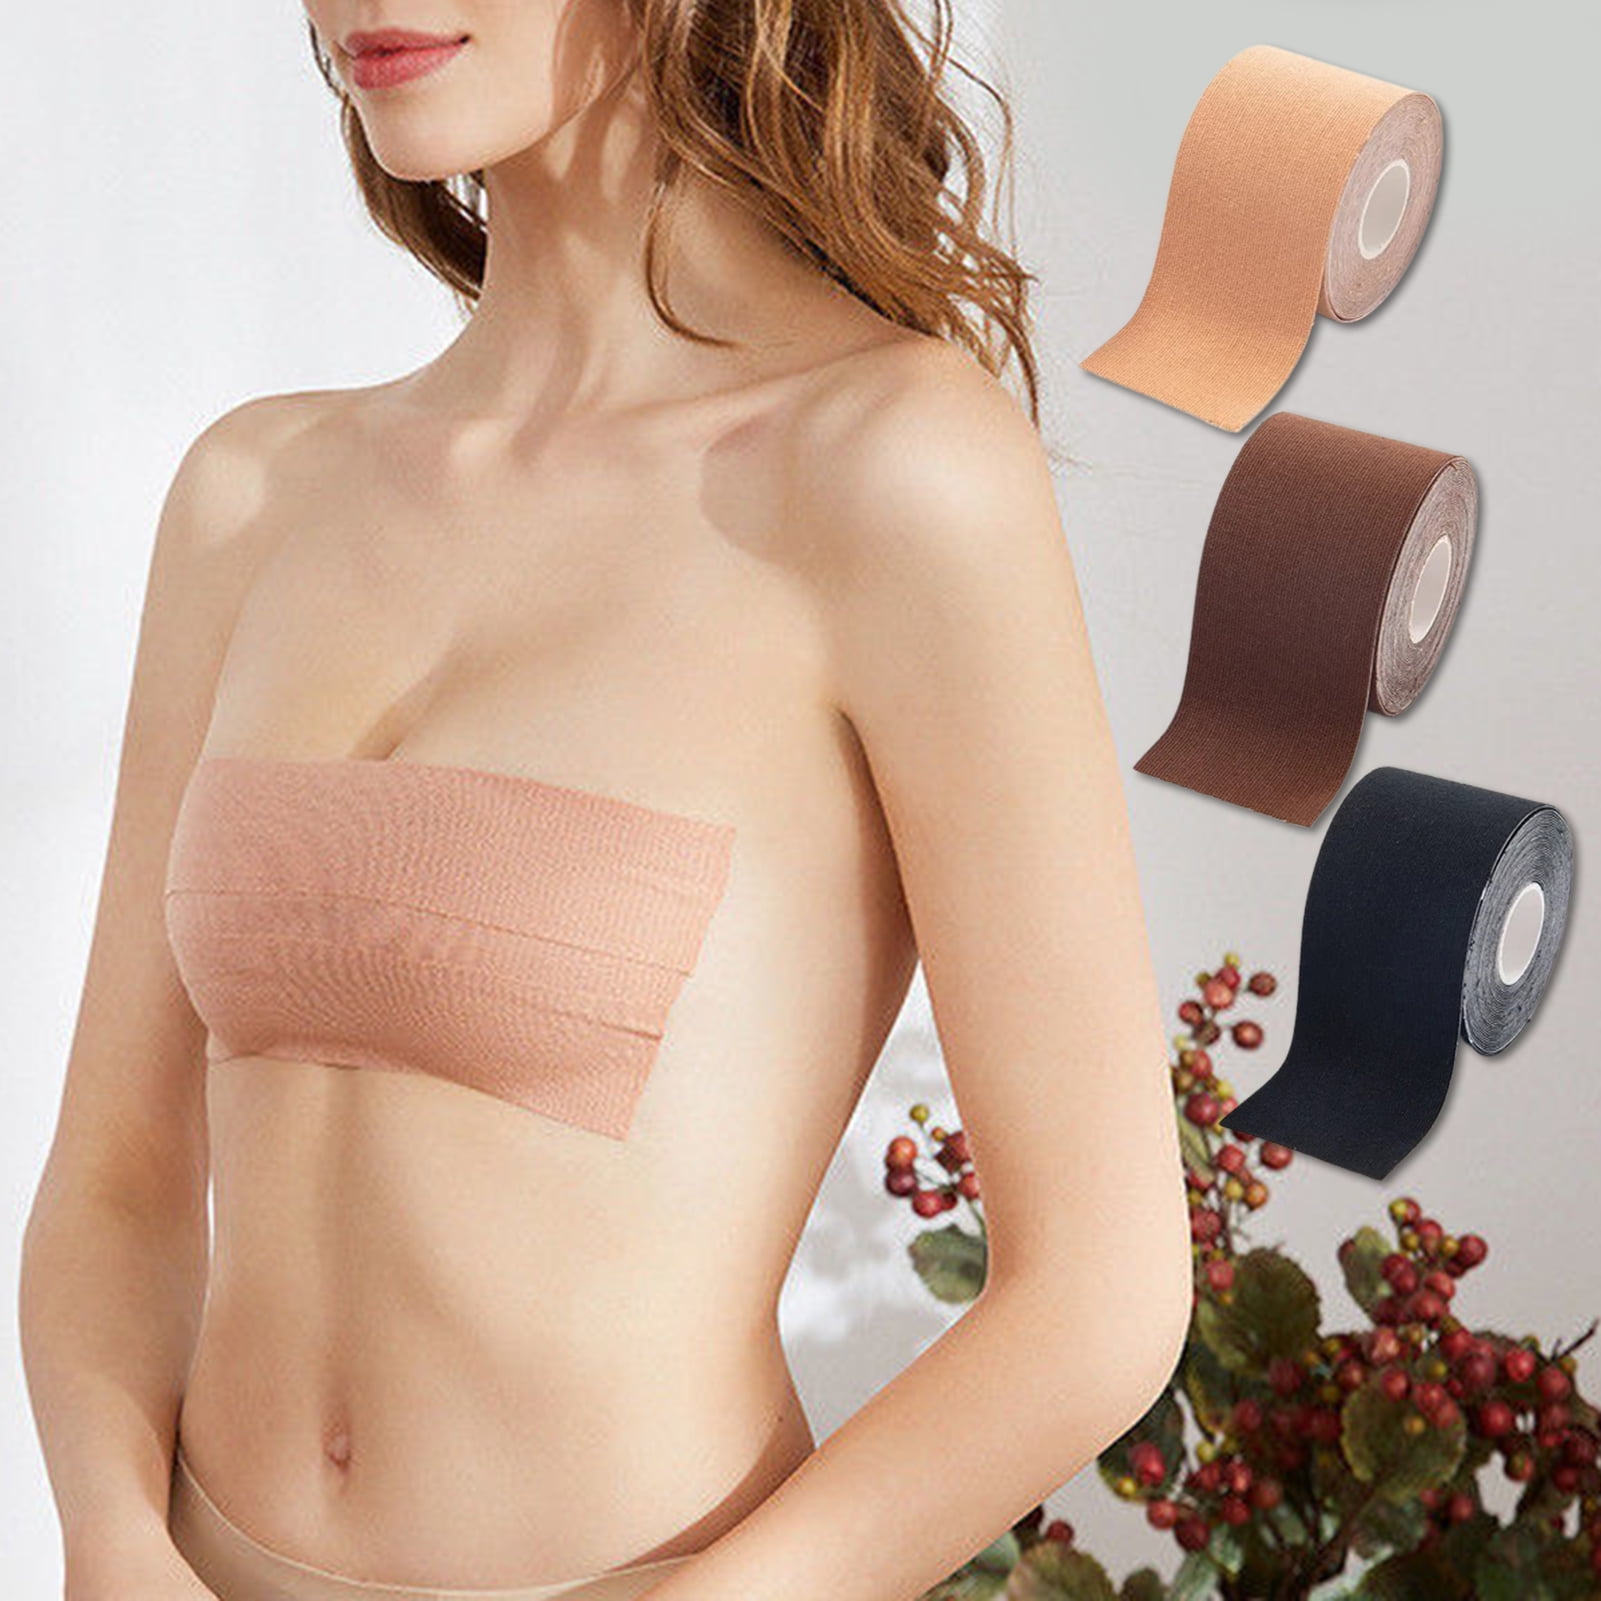  Zeldko Chest Support Tape for Contour Lift, Fashion